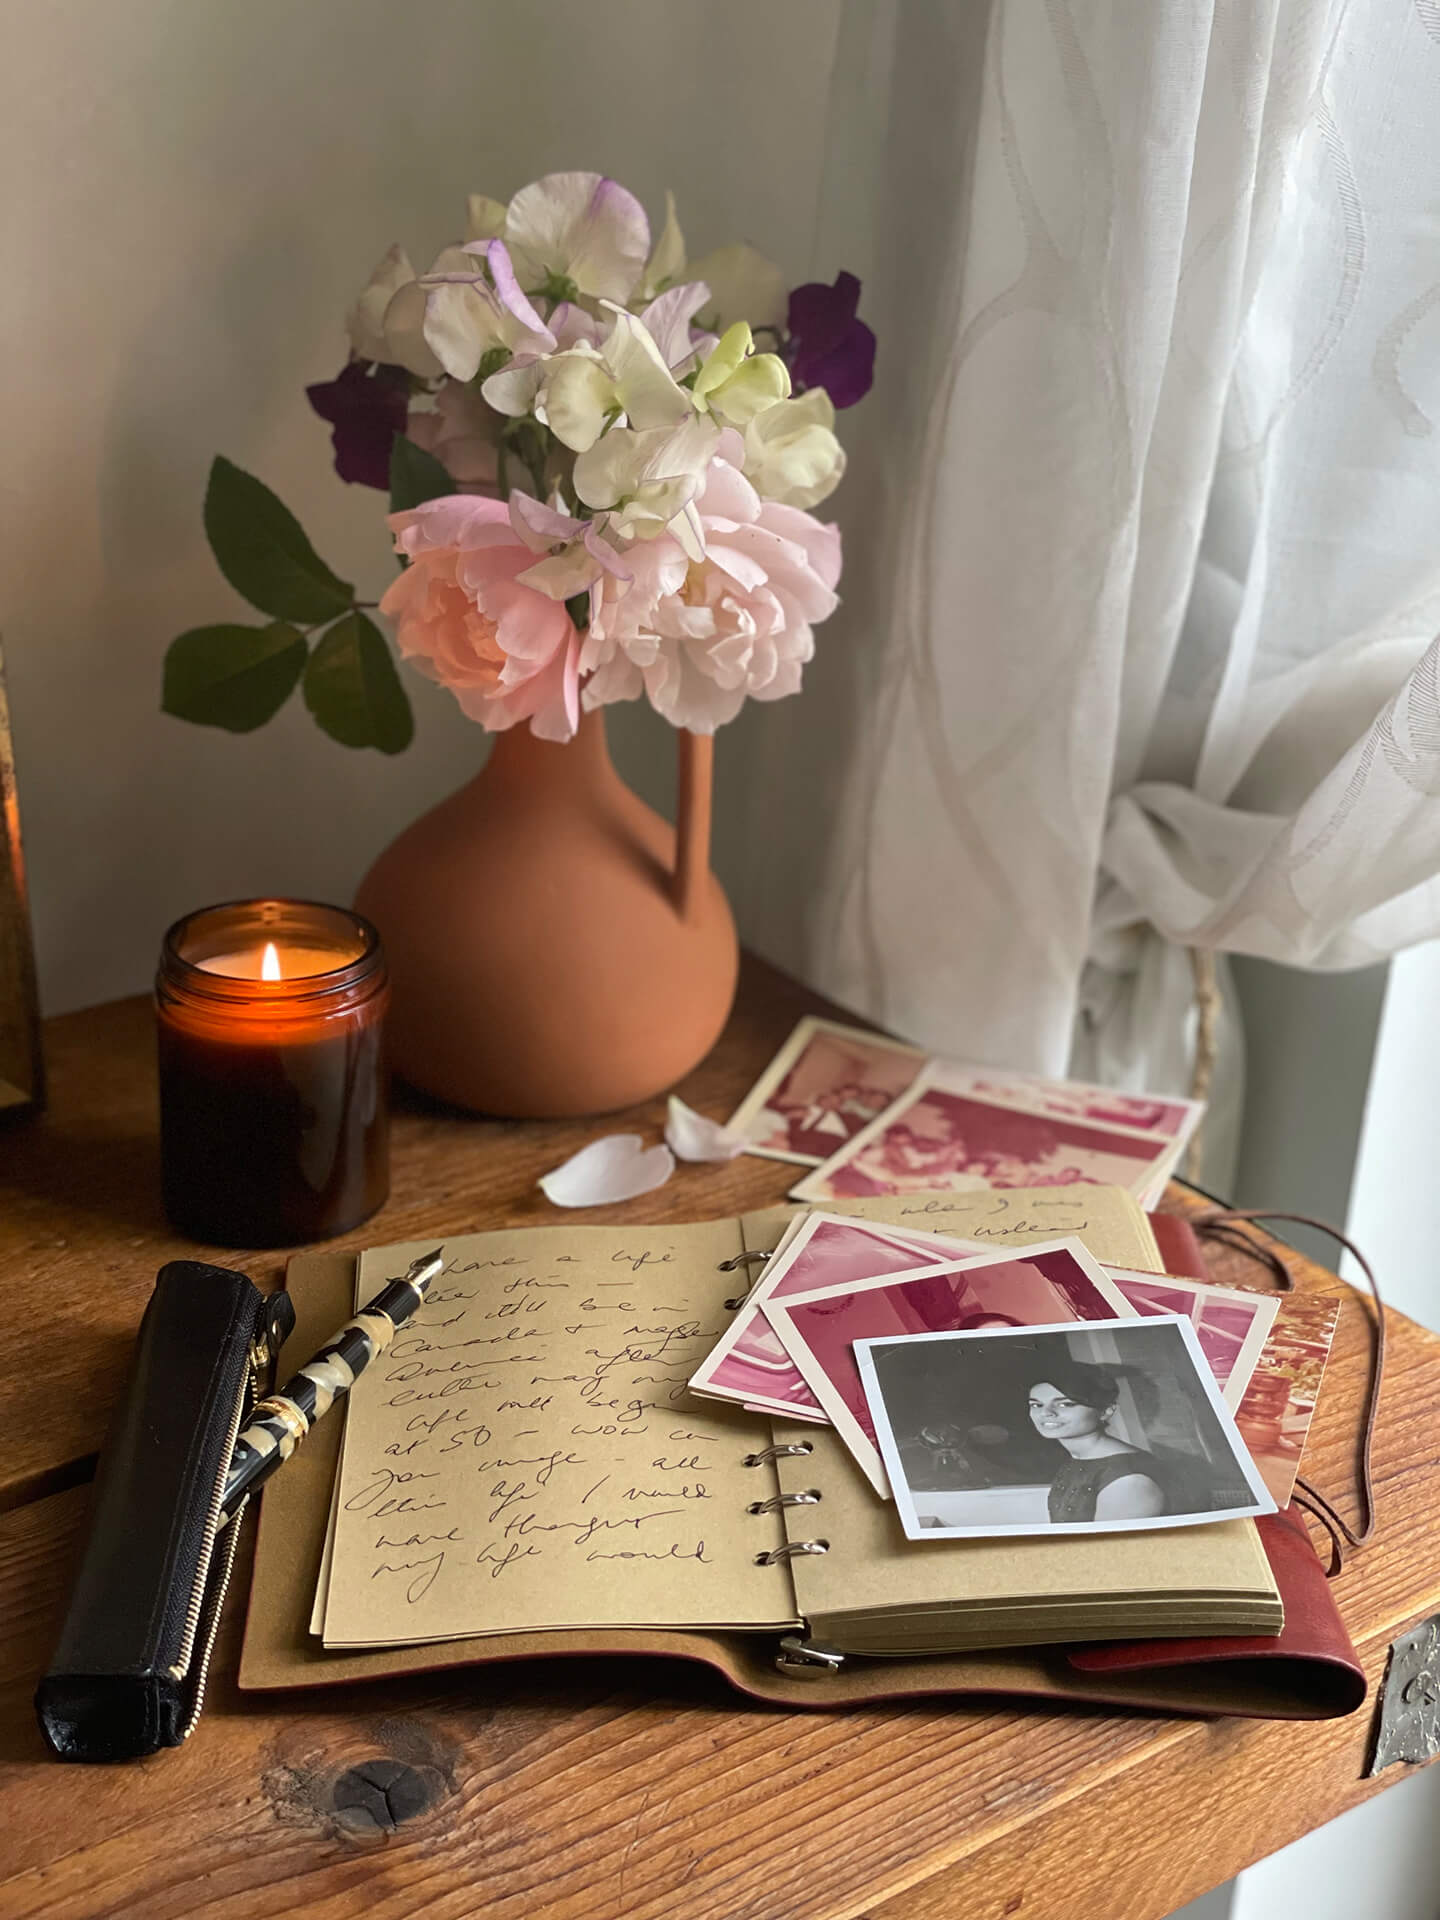 Open writing journal on a desk with old photographs next to a vase of flowers and a candle.